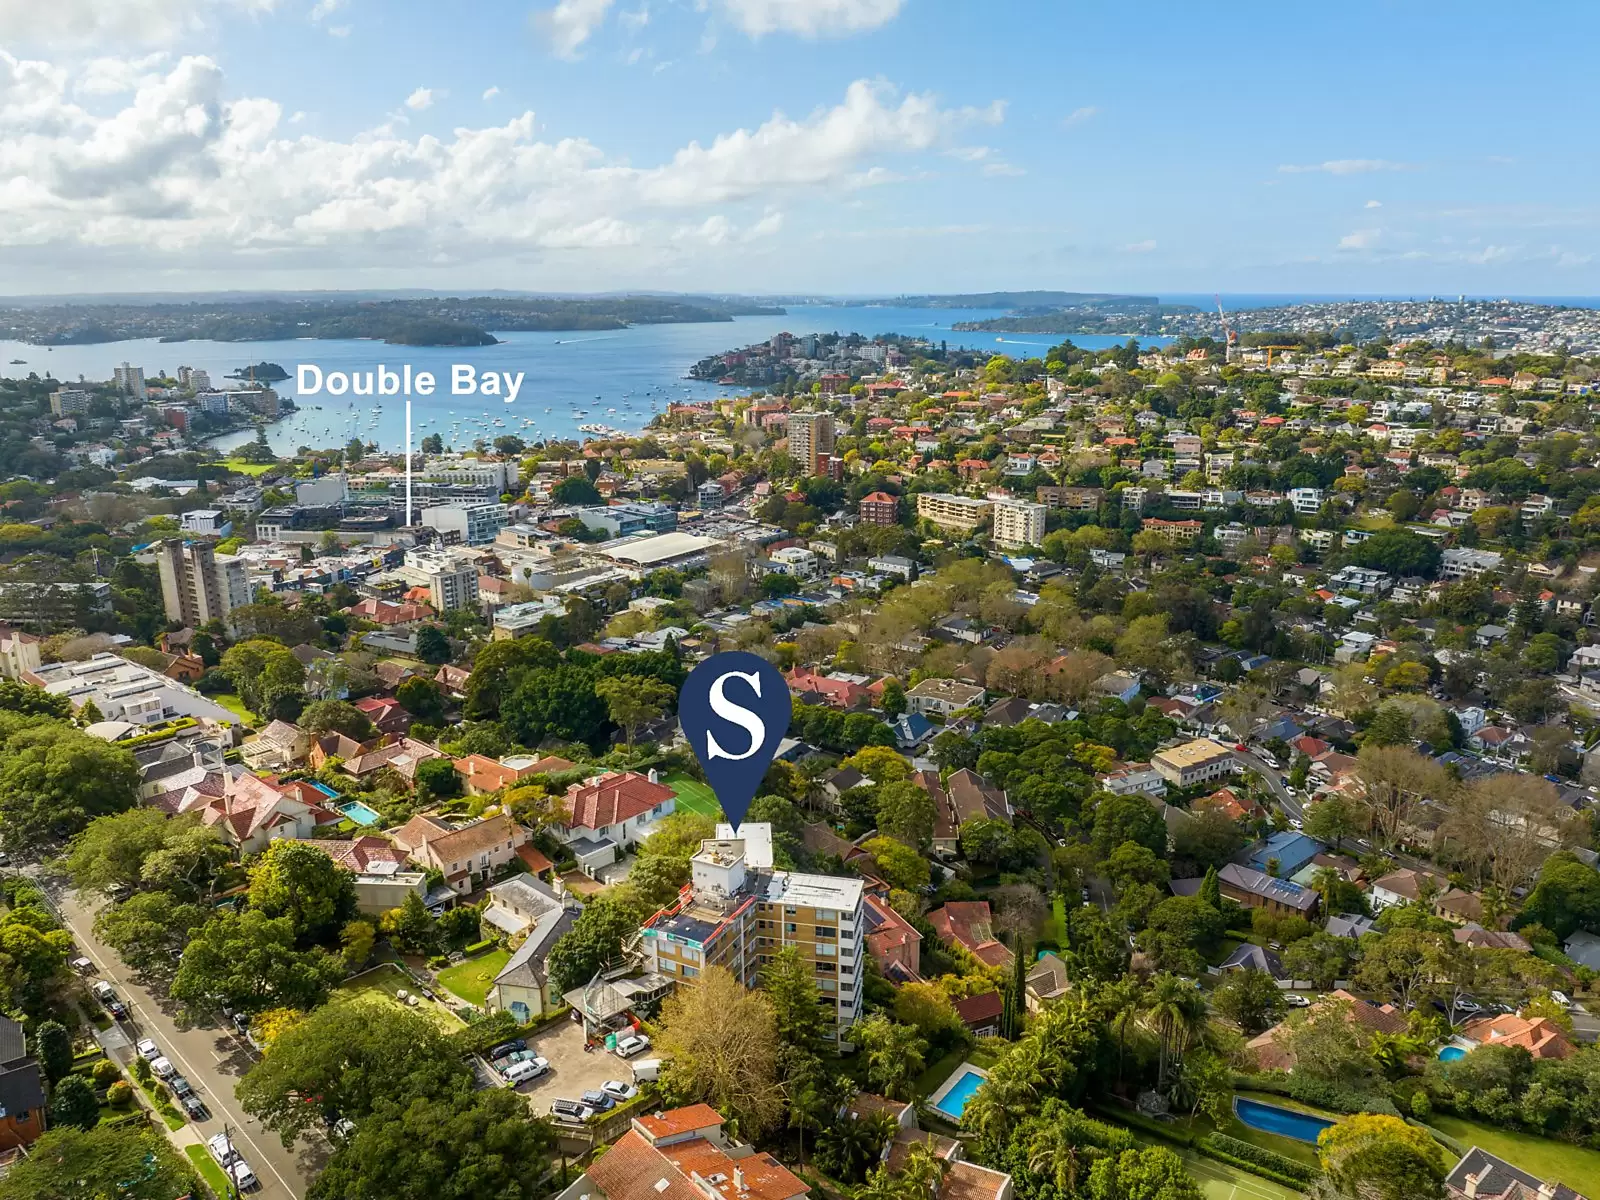 Photo #21: 13/321 Edgecliff Road, Woollahra - Sold by Sydney Sotheby's International Realty